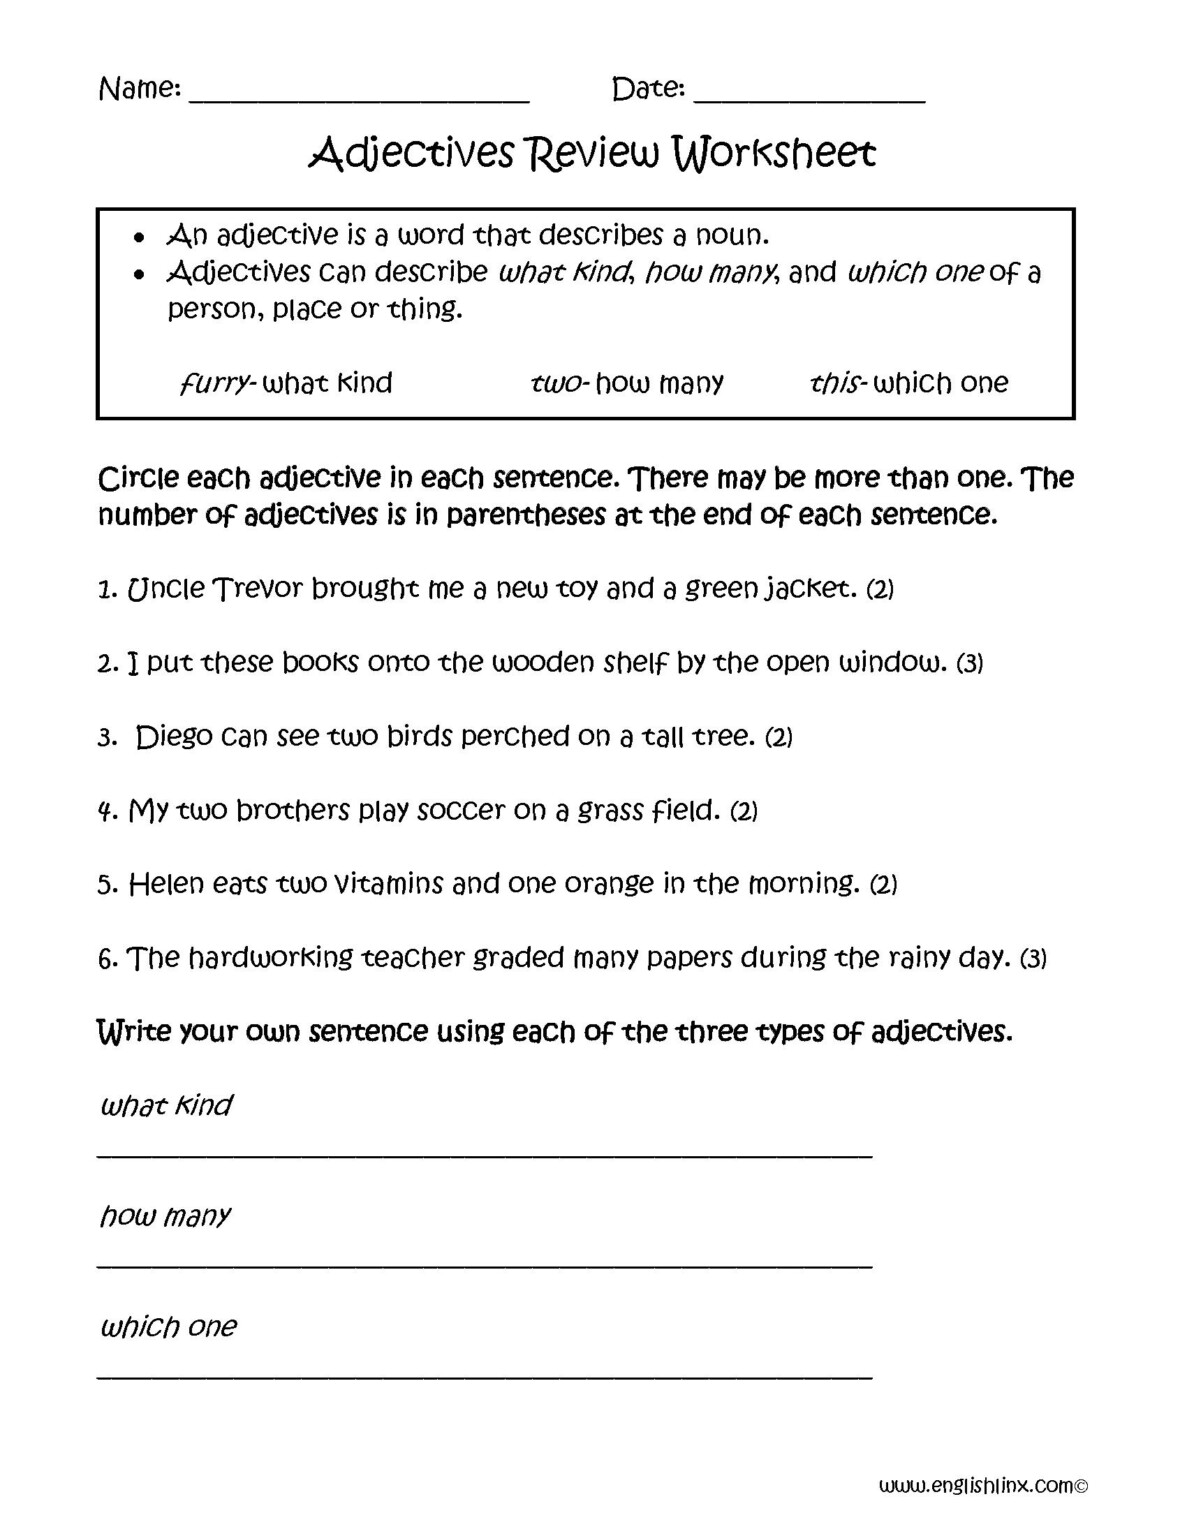 adjectives-worksheets-for-grade-3-with-answers-adjectiveworksheets